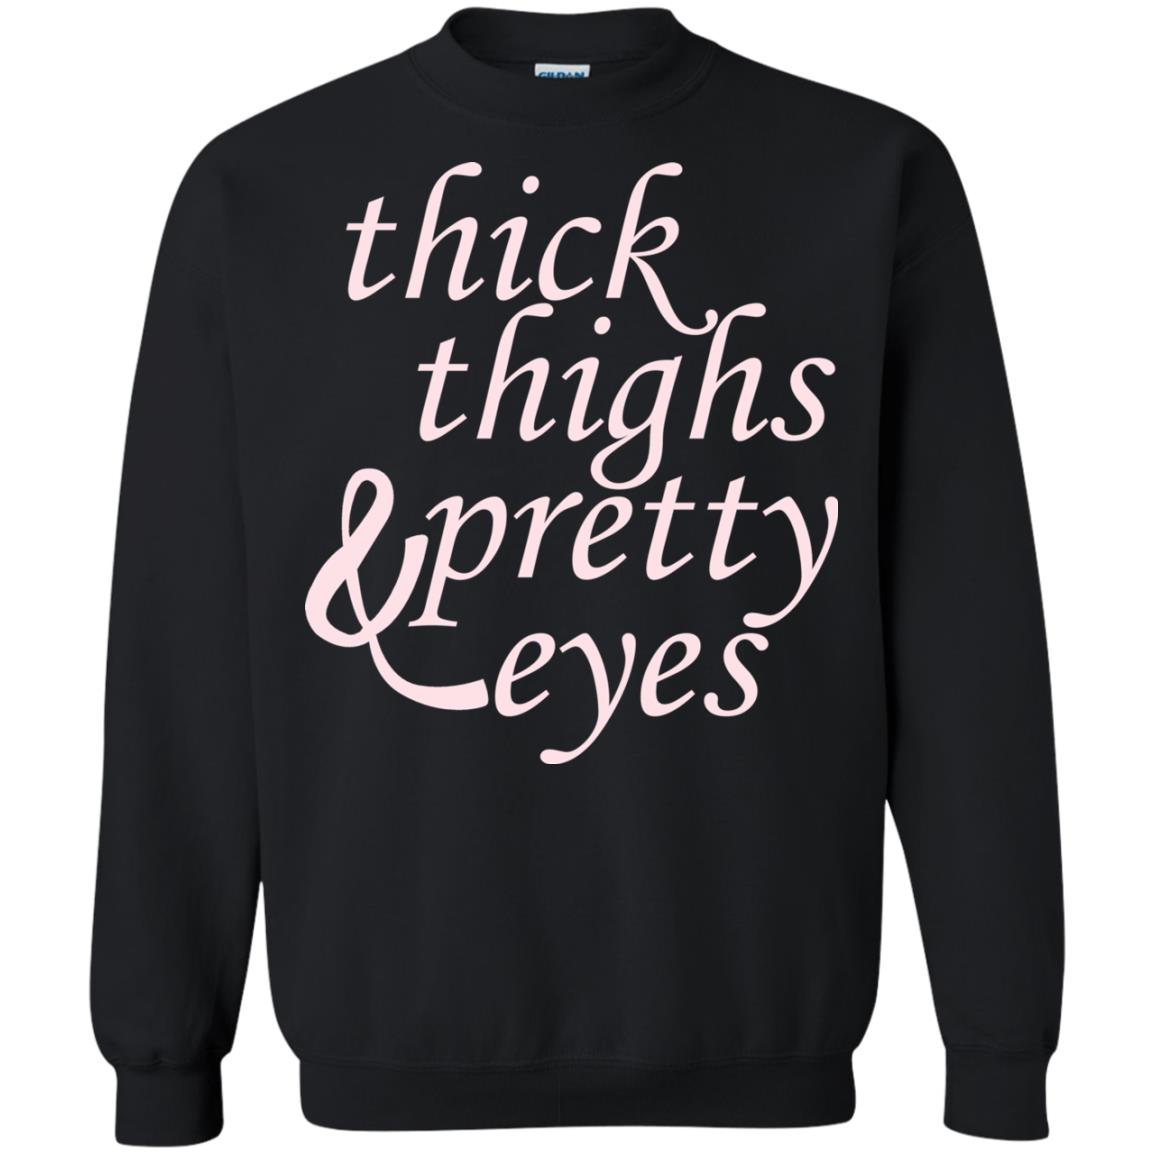 Thick Thighs And Pretty Eyes Shirts